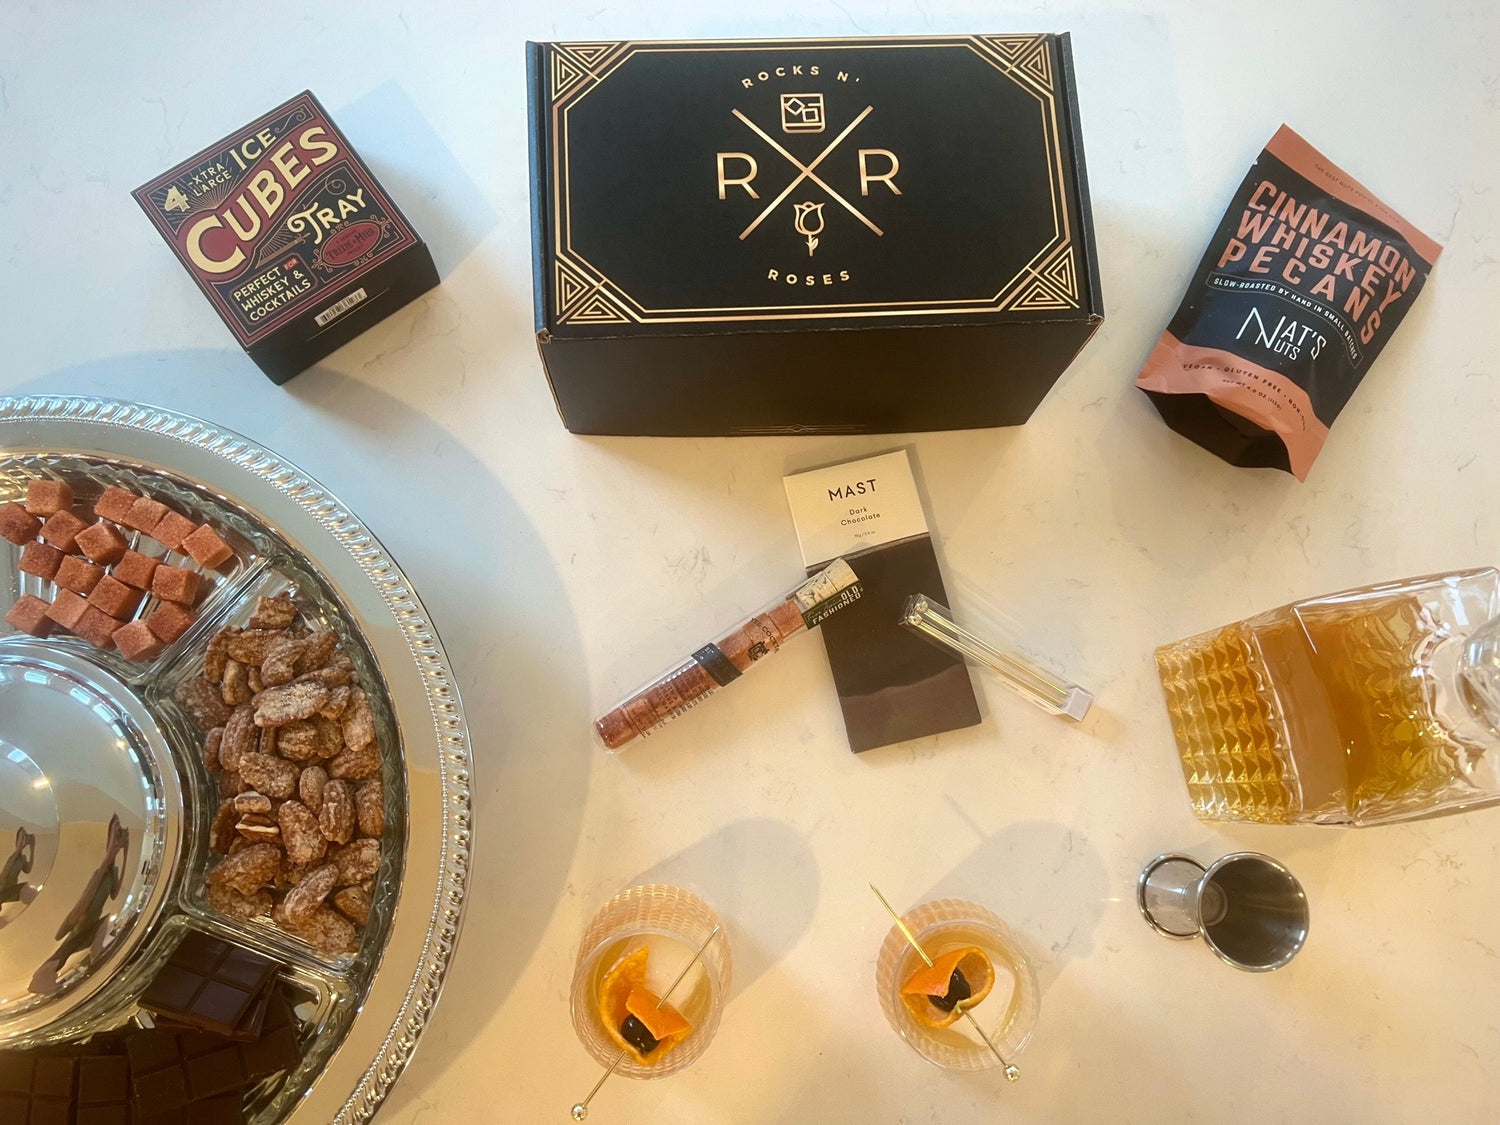 Overhead shot of the Rocks N' Roses Bourbon Box unpacked. Two Old Fashioned sitting on a table with a bottle of bourbon, cinnamon whiskey pecans, Old Fashioned sugar cubes, dark chocolate and two spinning whiskey glasses.